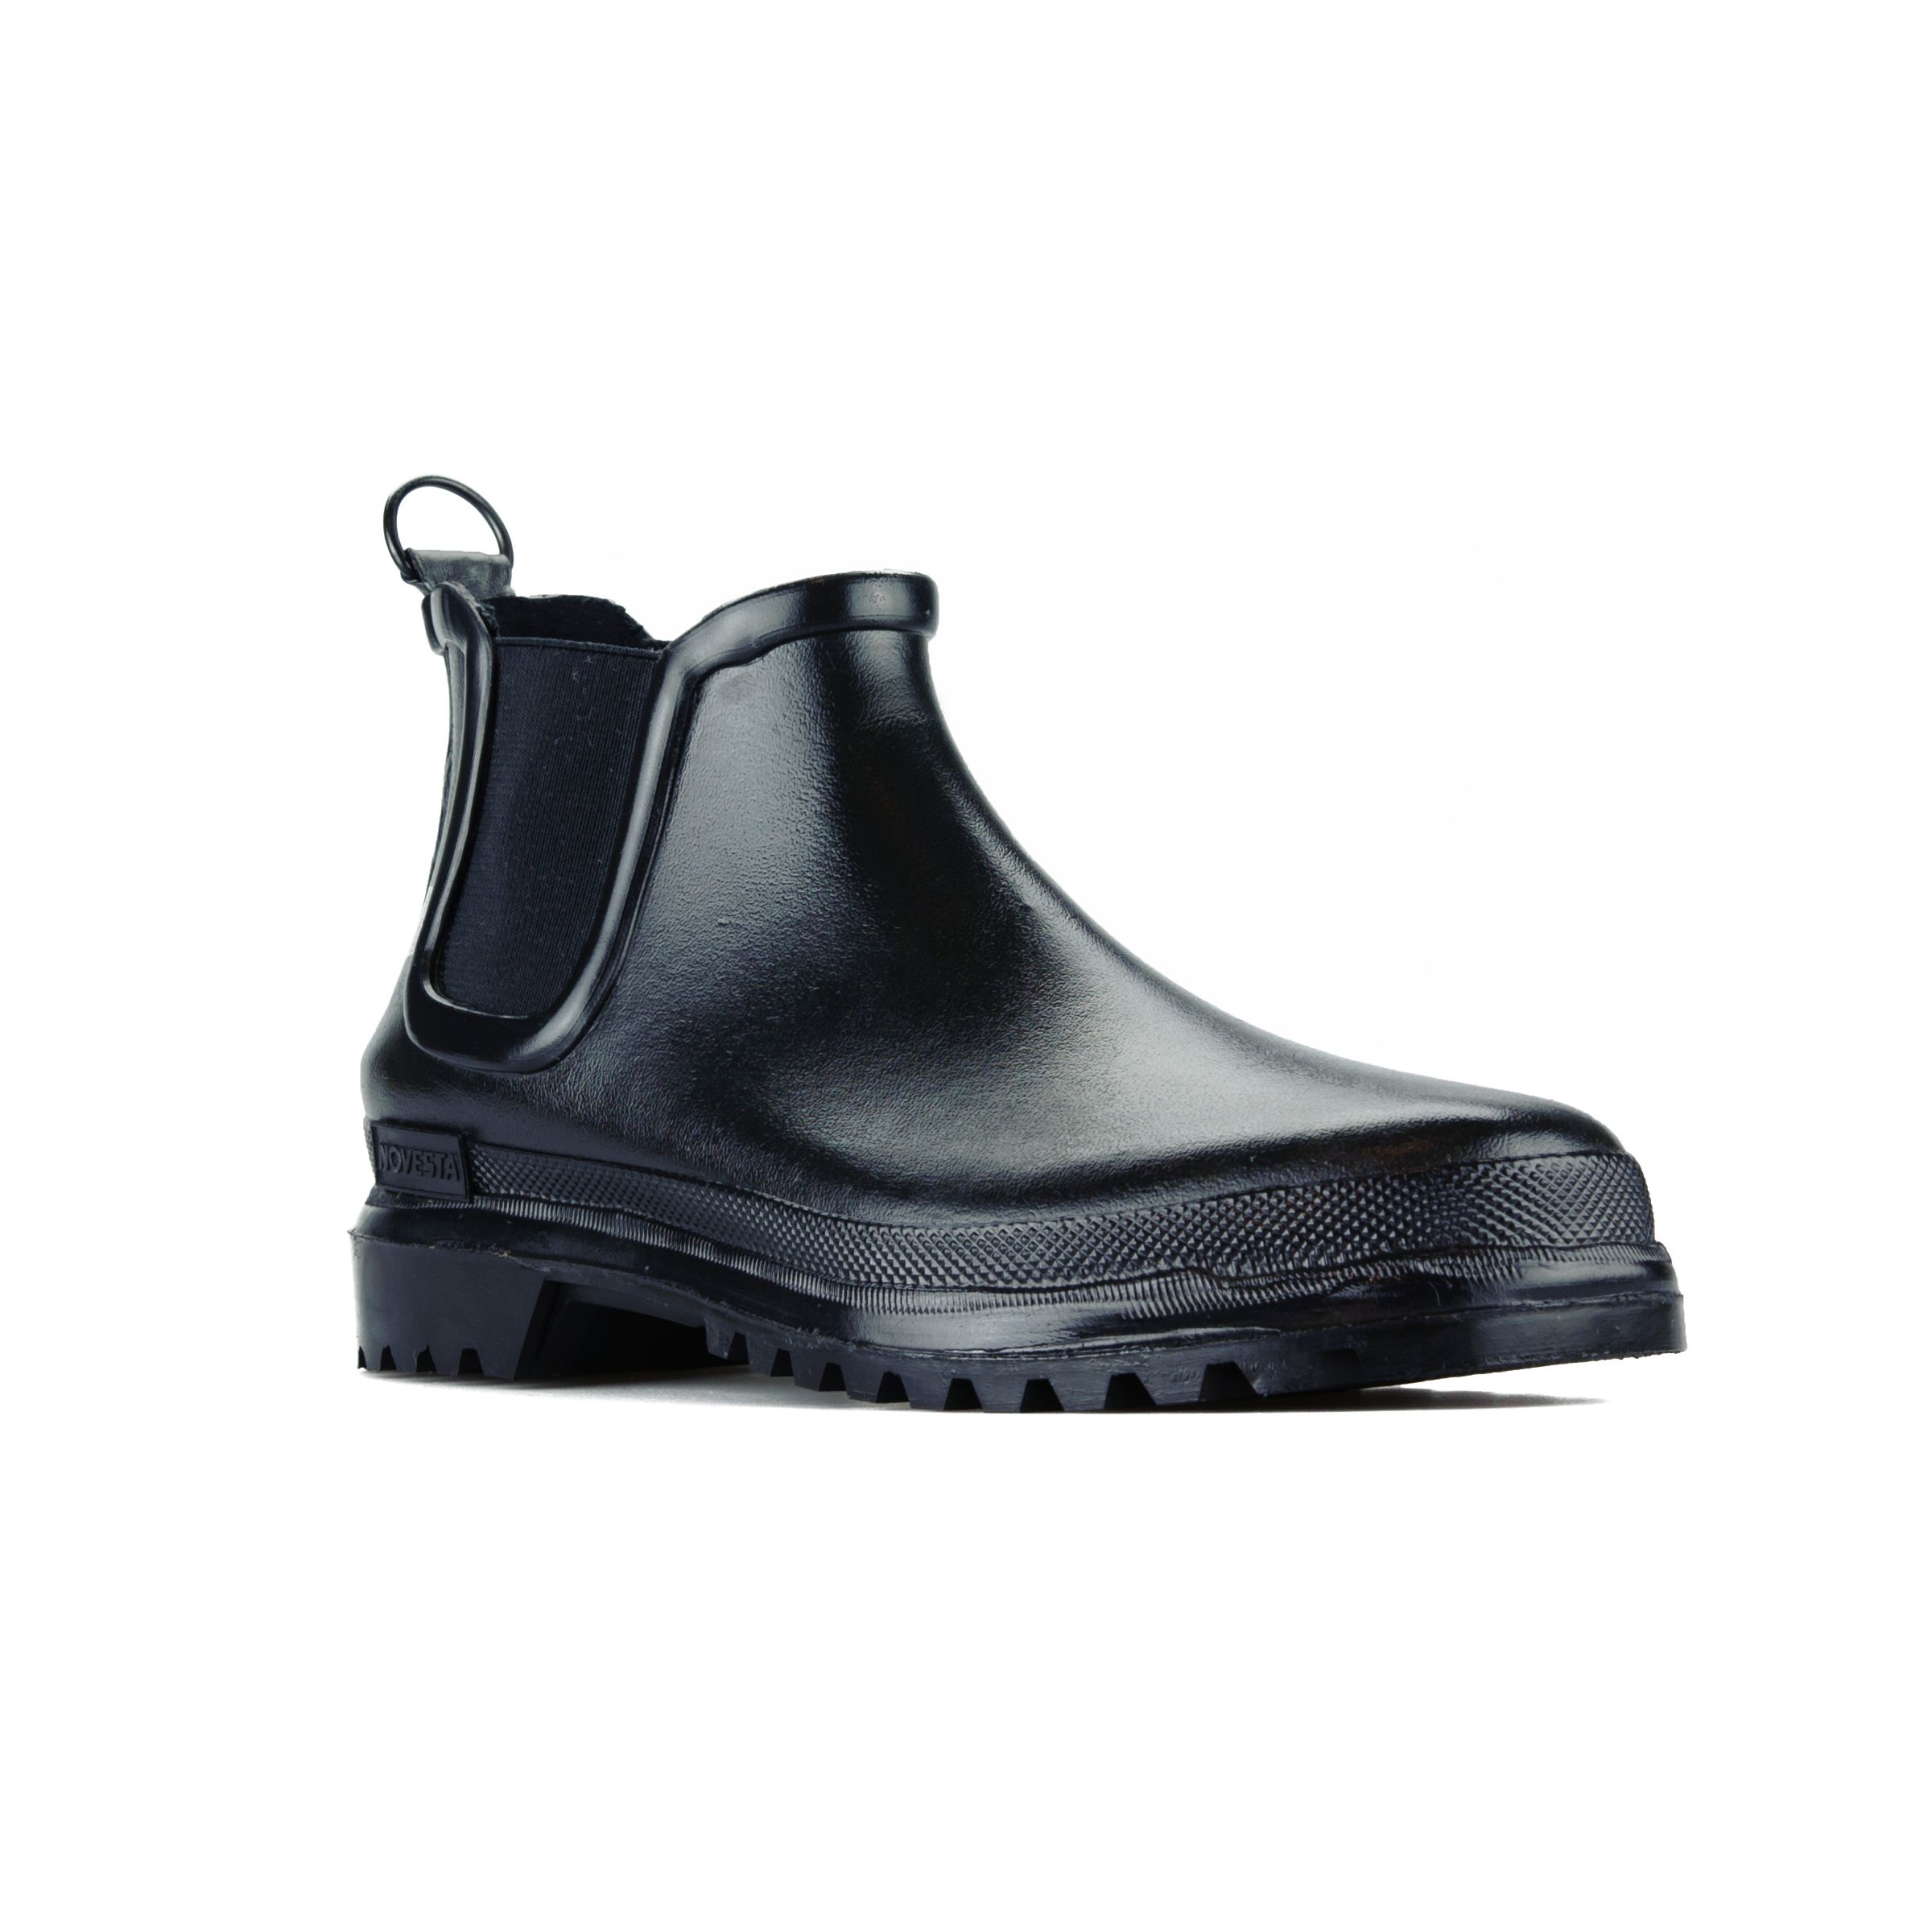 Picture of CHELSEA BOOT 615 BLACK/ZLA